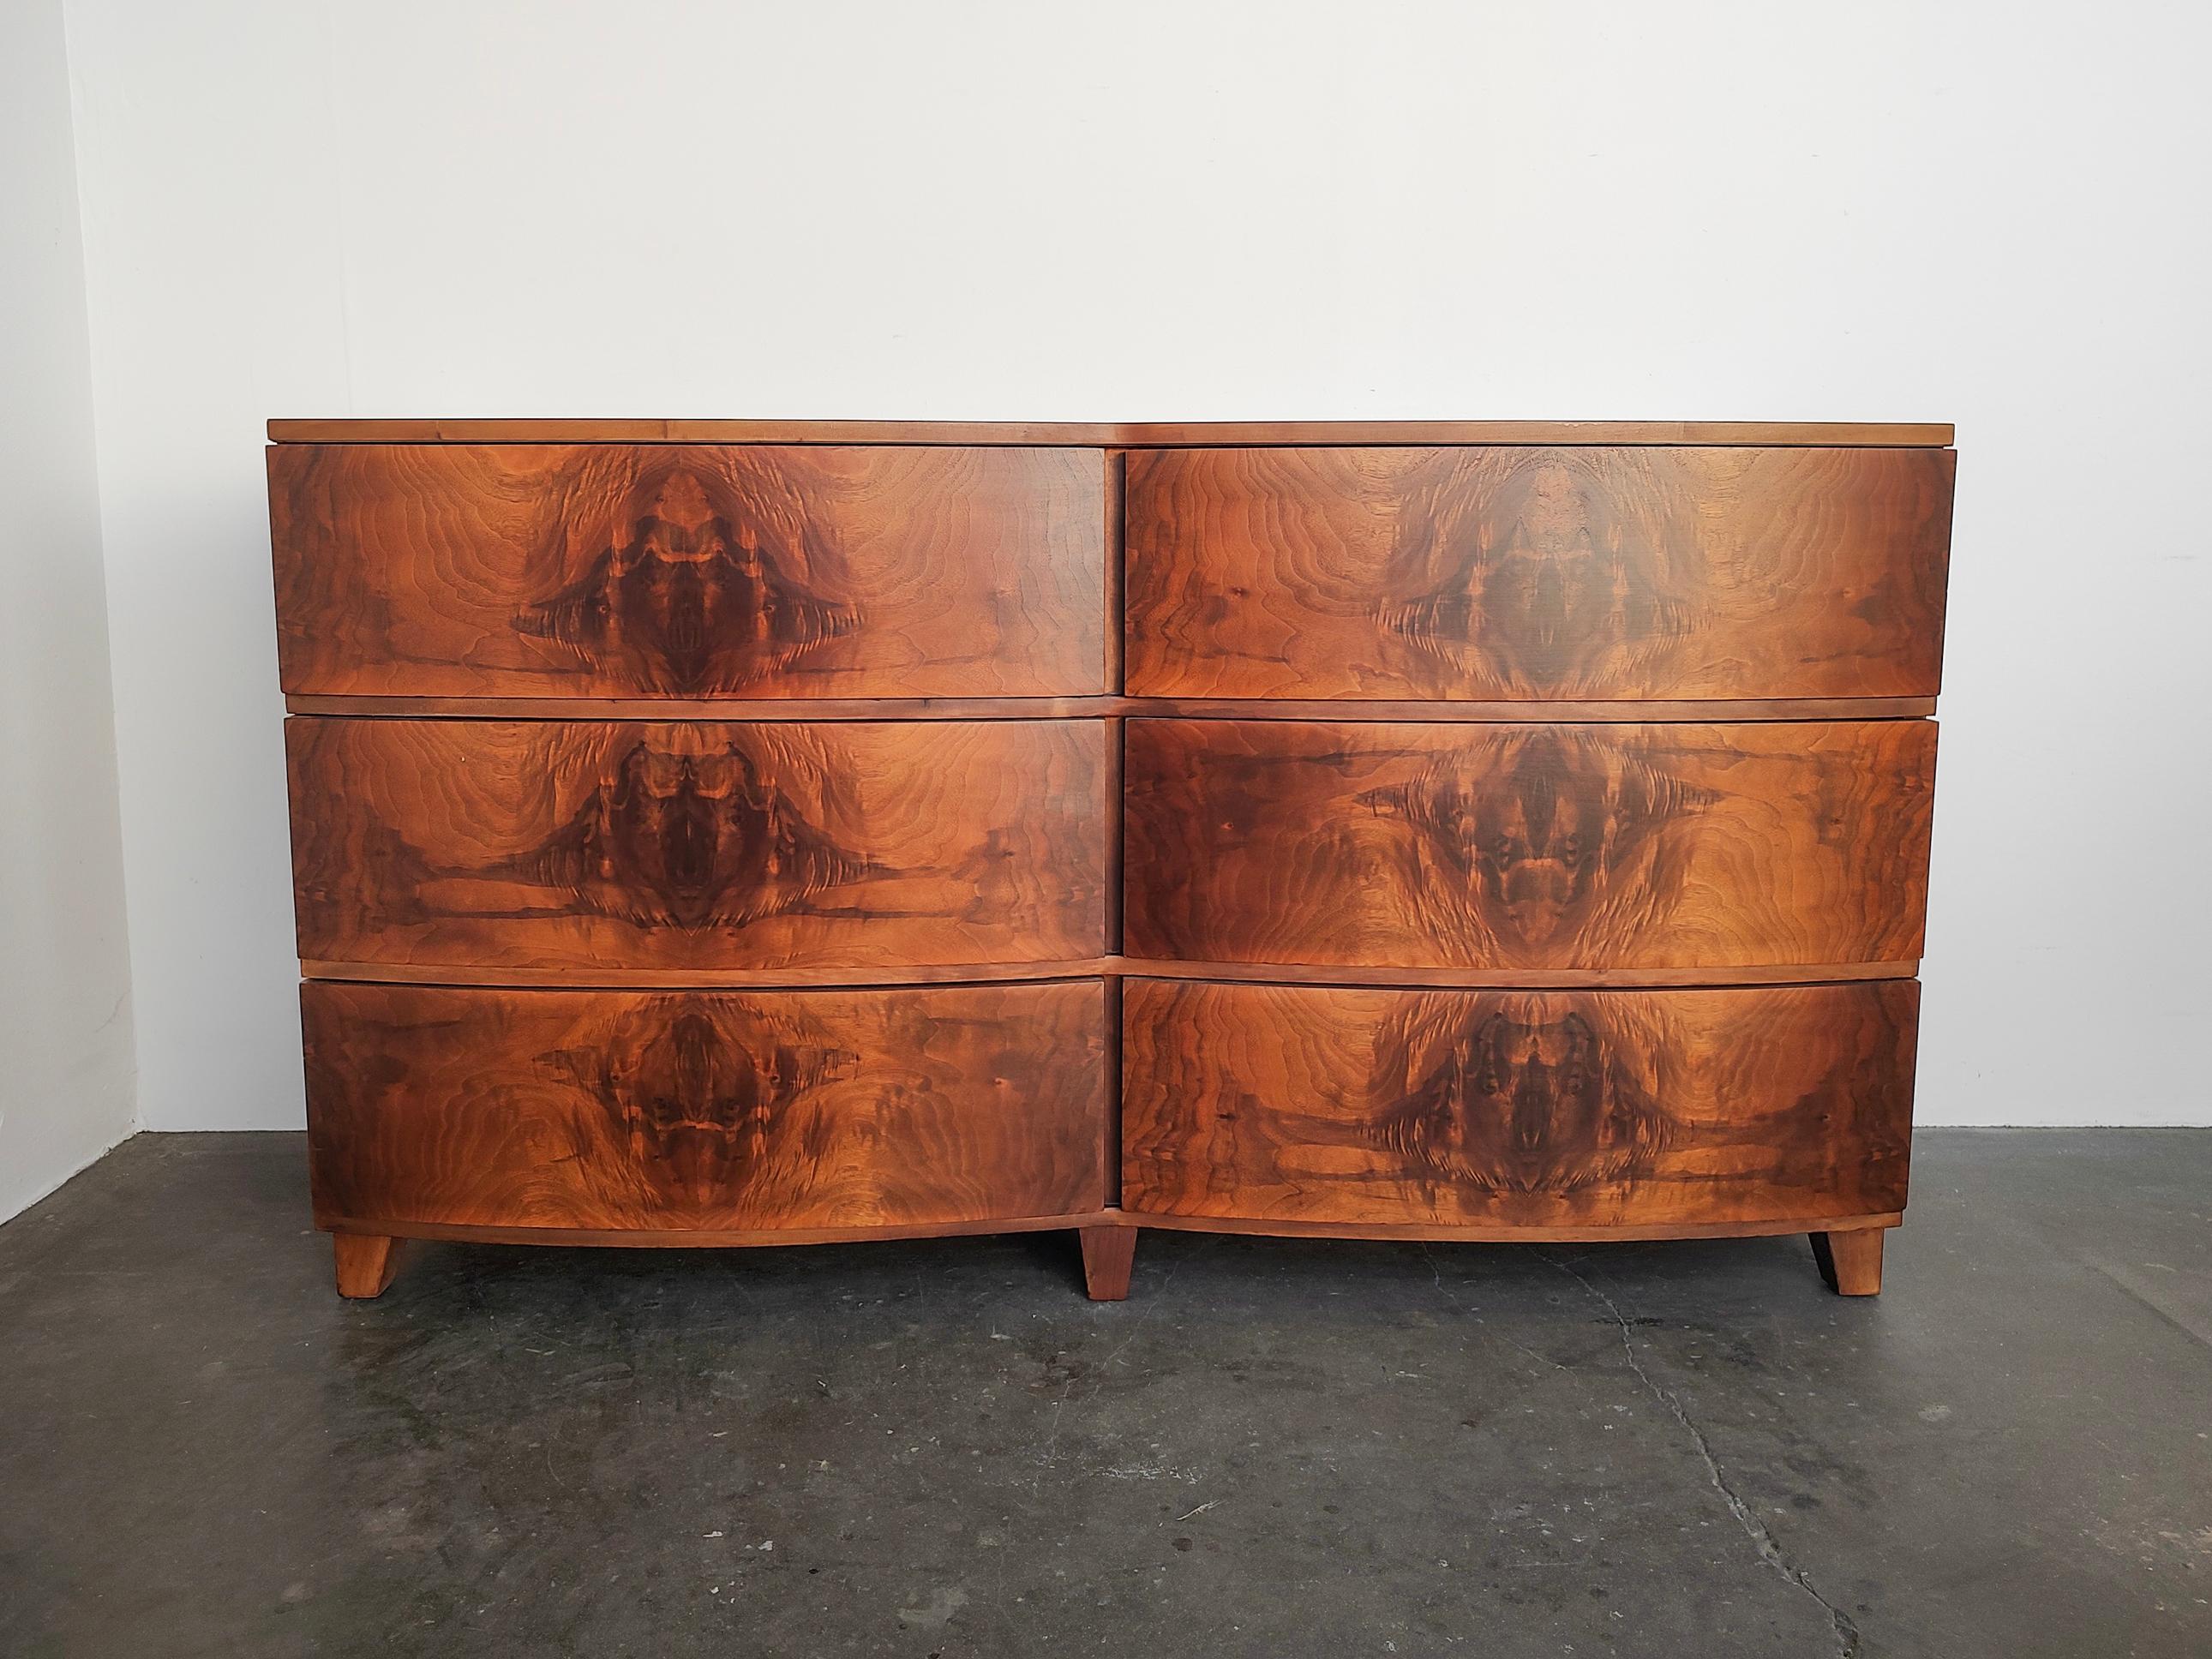 Professionally refinished Art Deco Tri-Bond Furniture lowboy dresser. Gorgeous walnut burl wood grain showcased on each of the six drawers with dovetail joinery. Minimal Art Deco double curved design. Overall excellent condition, a couple of areas